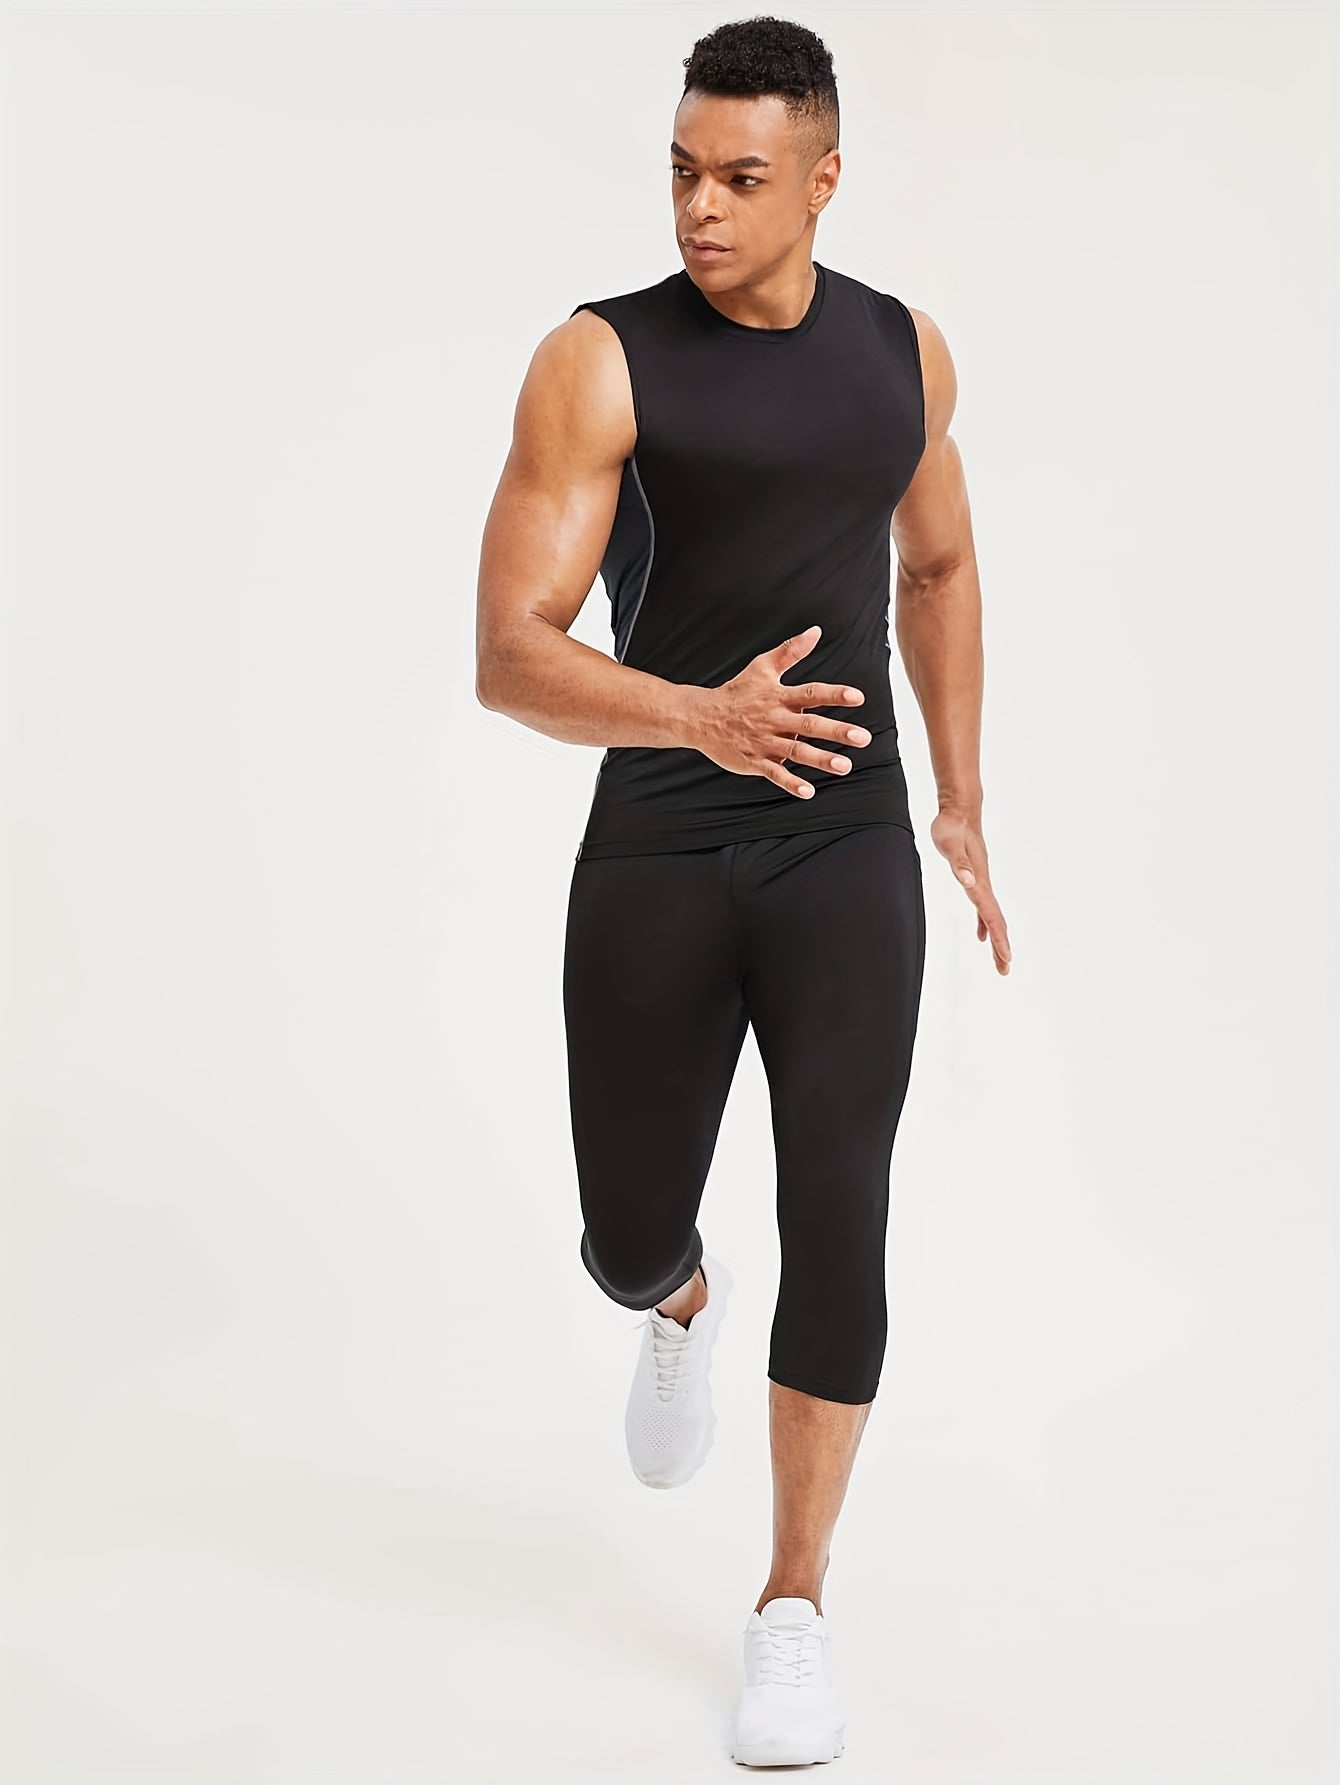 Men's Stretch Capri Sports Pants Activewear, Lightweight Quick Dry Athletic Trousers For Gym Fitness Workout